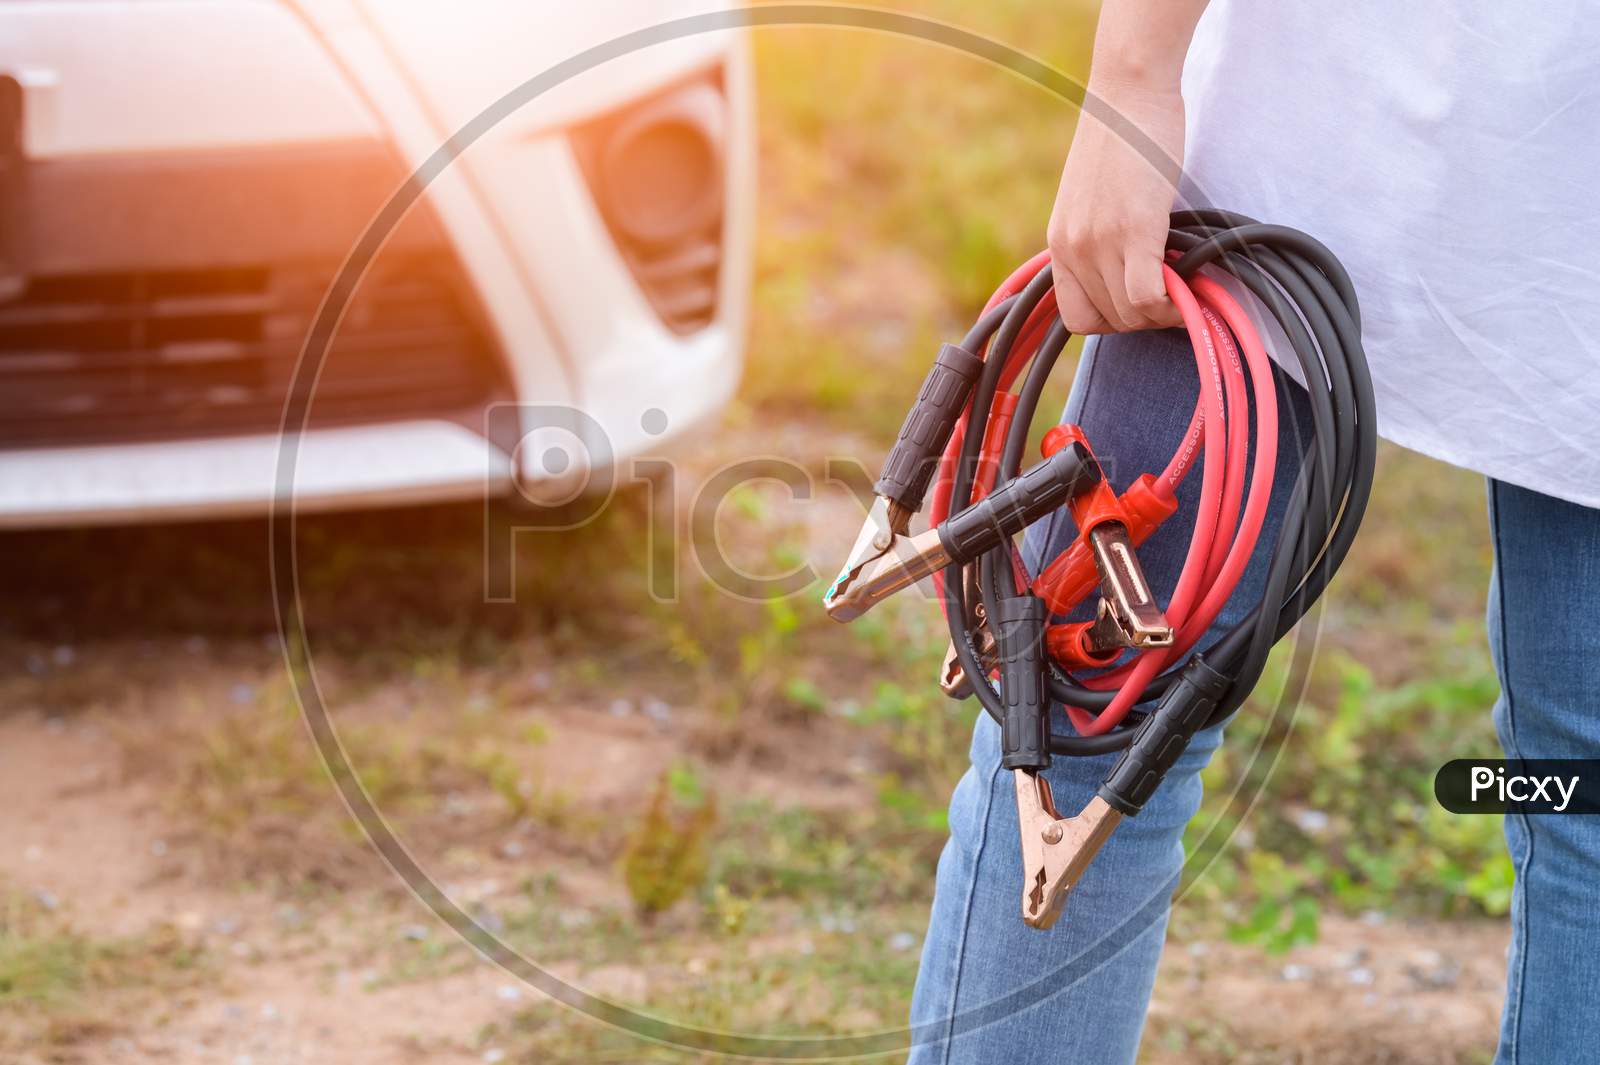 Closeup Of Woman Hand Holding Battery Cable Copper Wire For Repairing Broken Car By Connect Battery With Red And Black Line To Electric Terminal By Herself. Car Maintenance And Transportation Concept